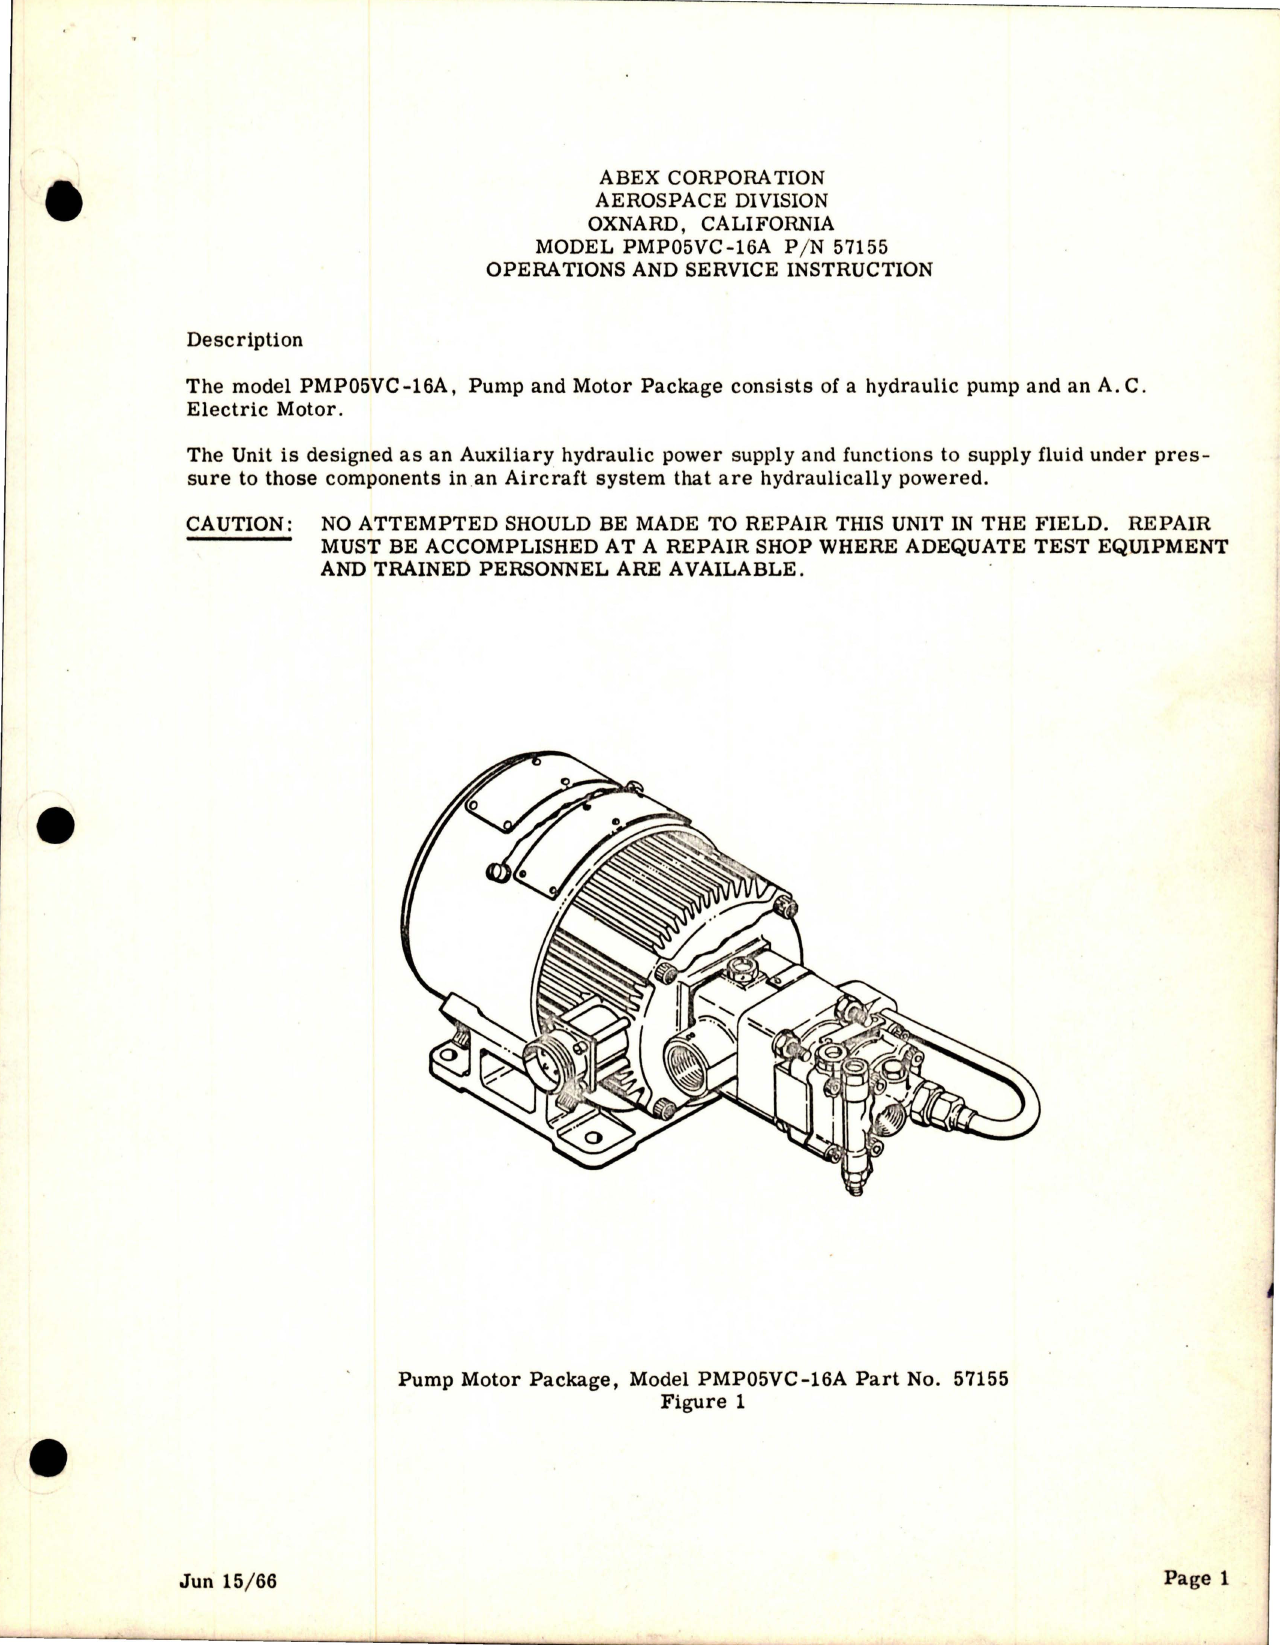 Sample page 1 from AirCorps Library document: Operation and Service Instructions for Pump Motor Package - Part 57155 - Model PMP05VC-16A 